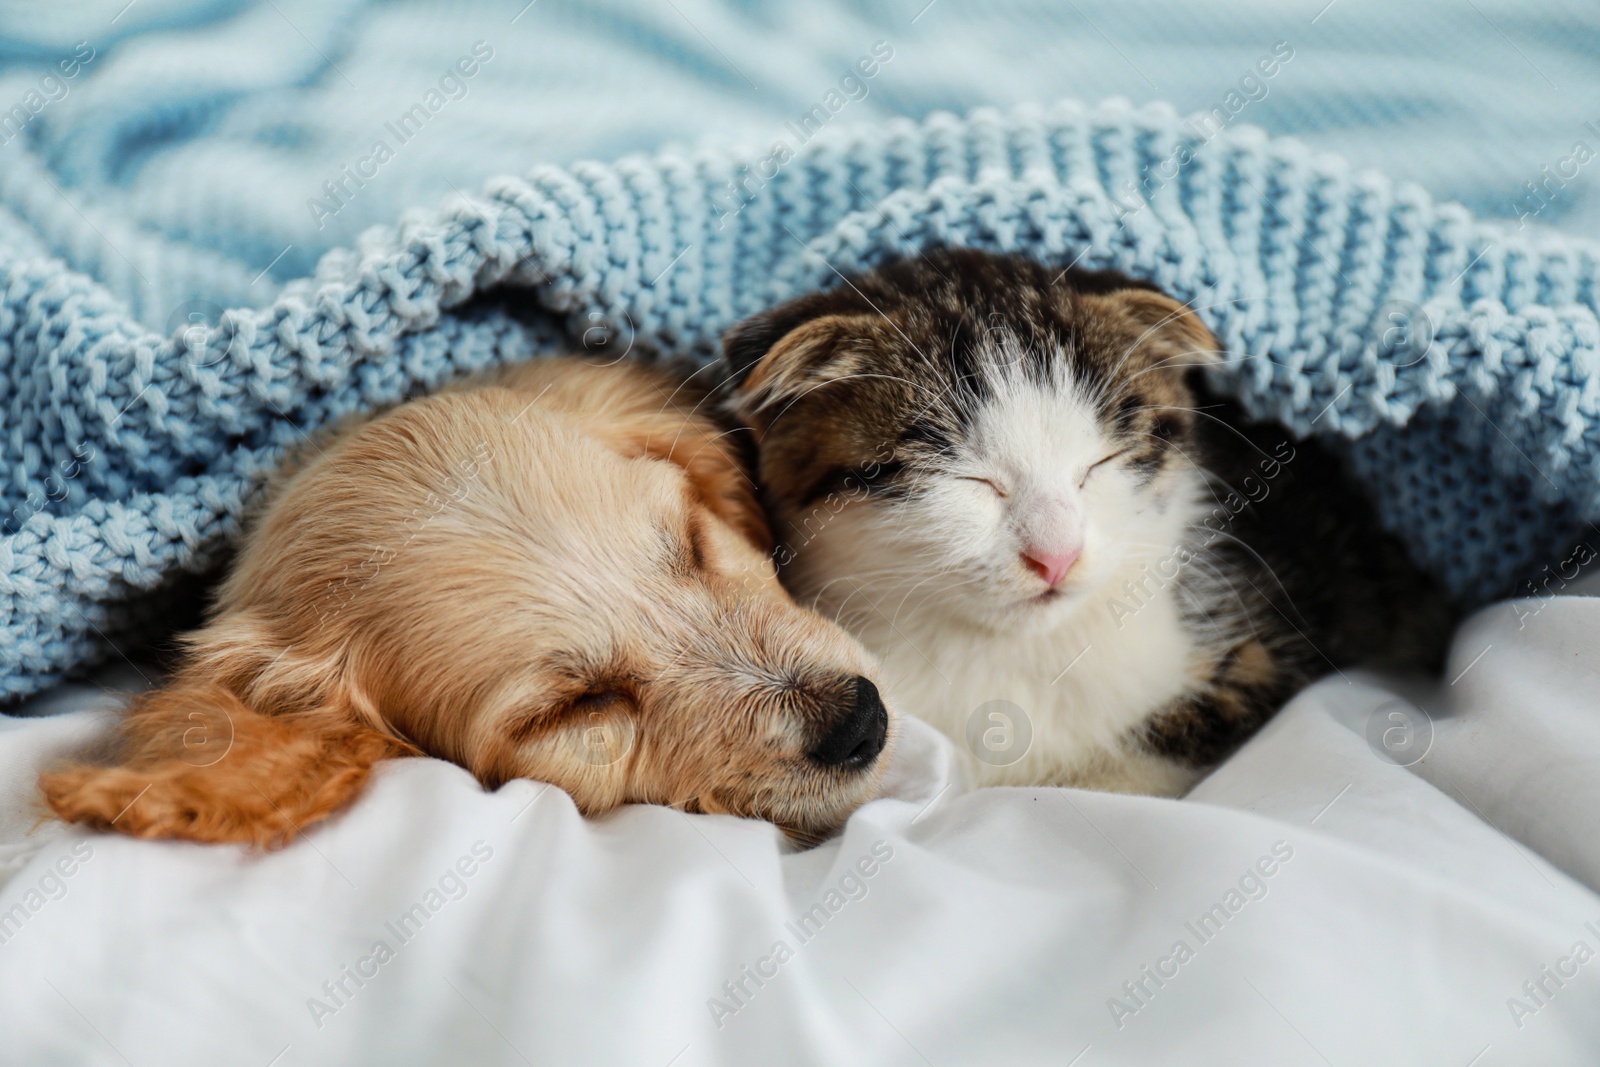 Photo of Adorable little kitten and puppy sleeping on bed